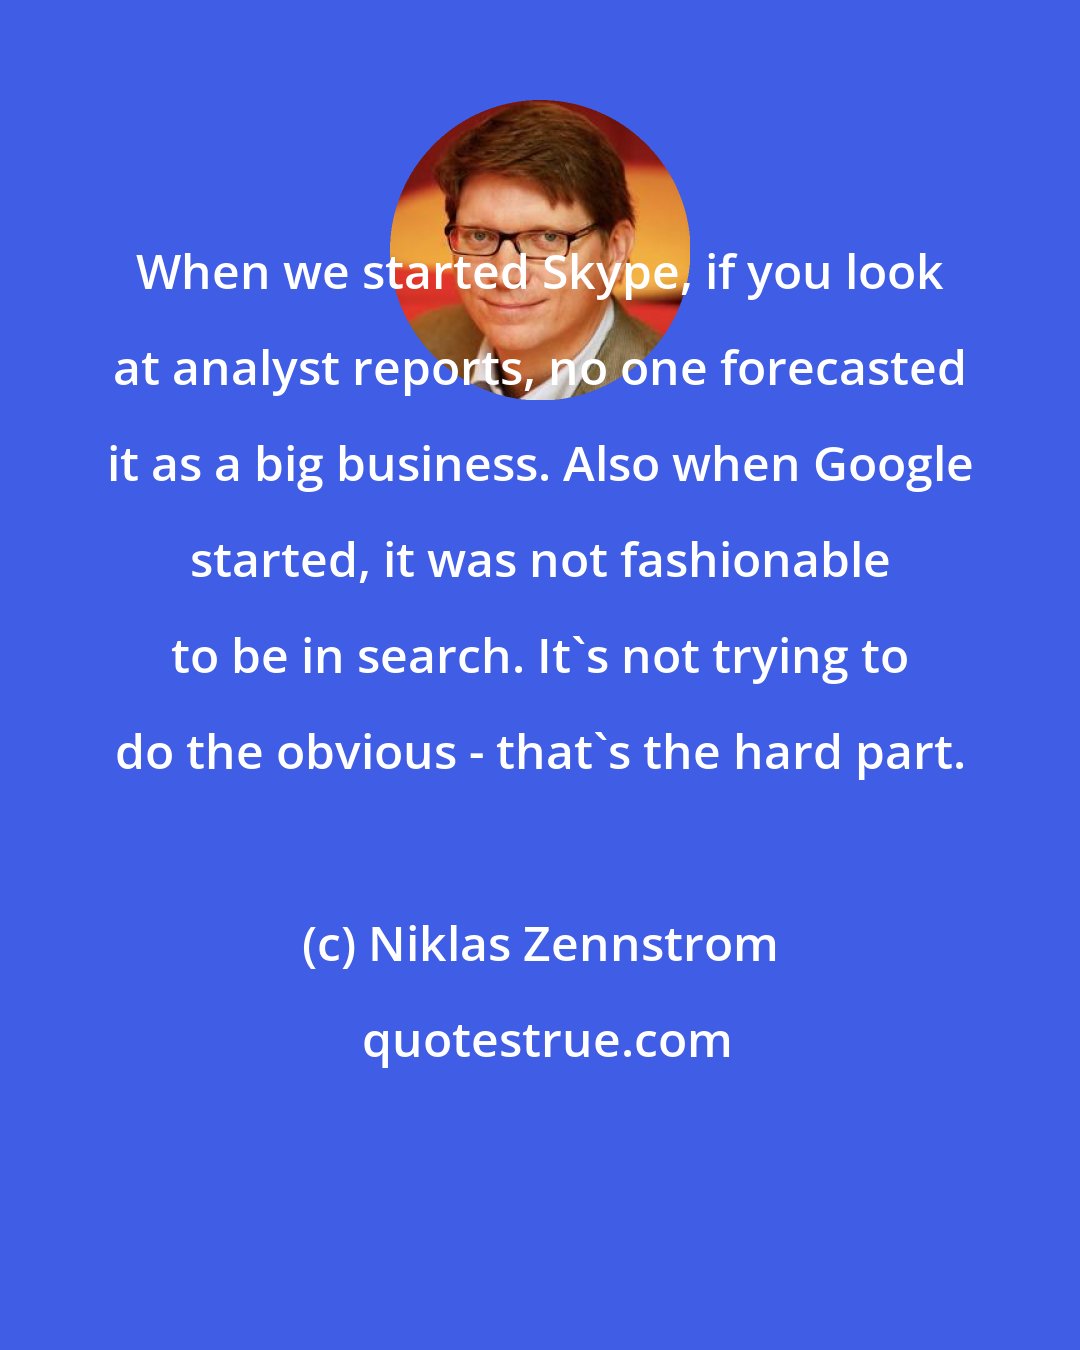 Niklas Zennstrom: When we started Skype, if you look at analyst reports, no one forecasted it as a big business. Also when Google started, it was not fashionable to be in search. It's not trying to do the obvious - that's the hard part.